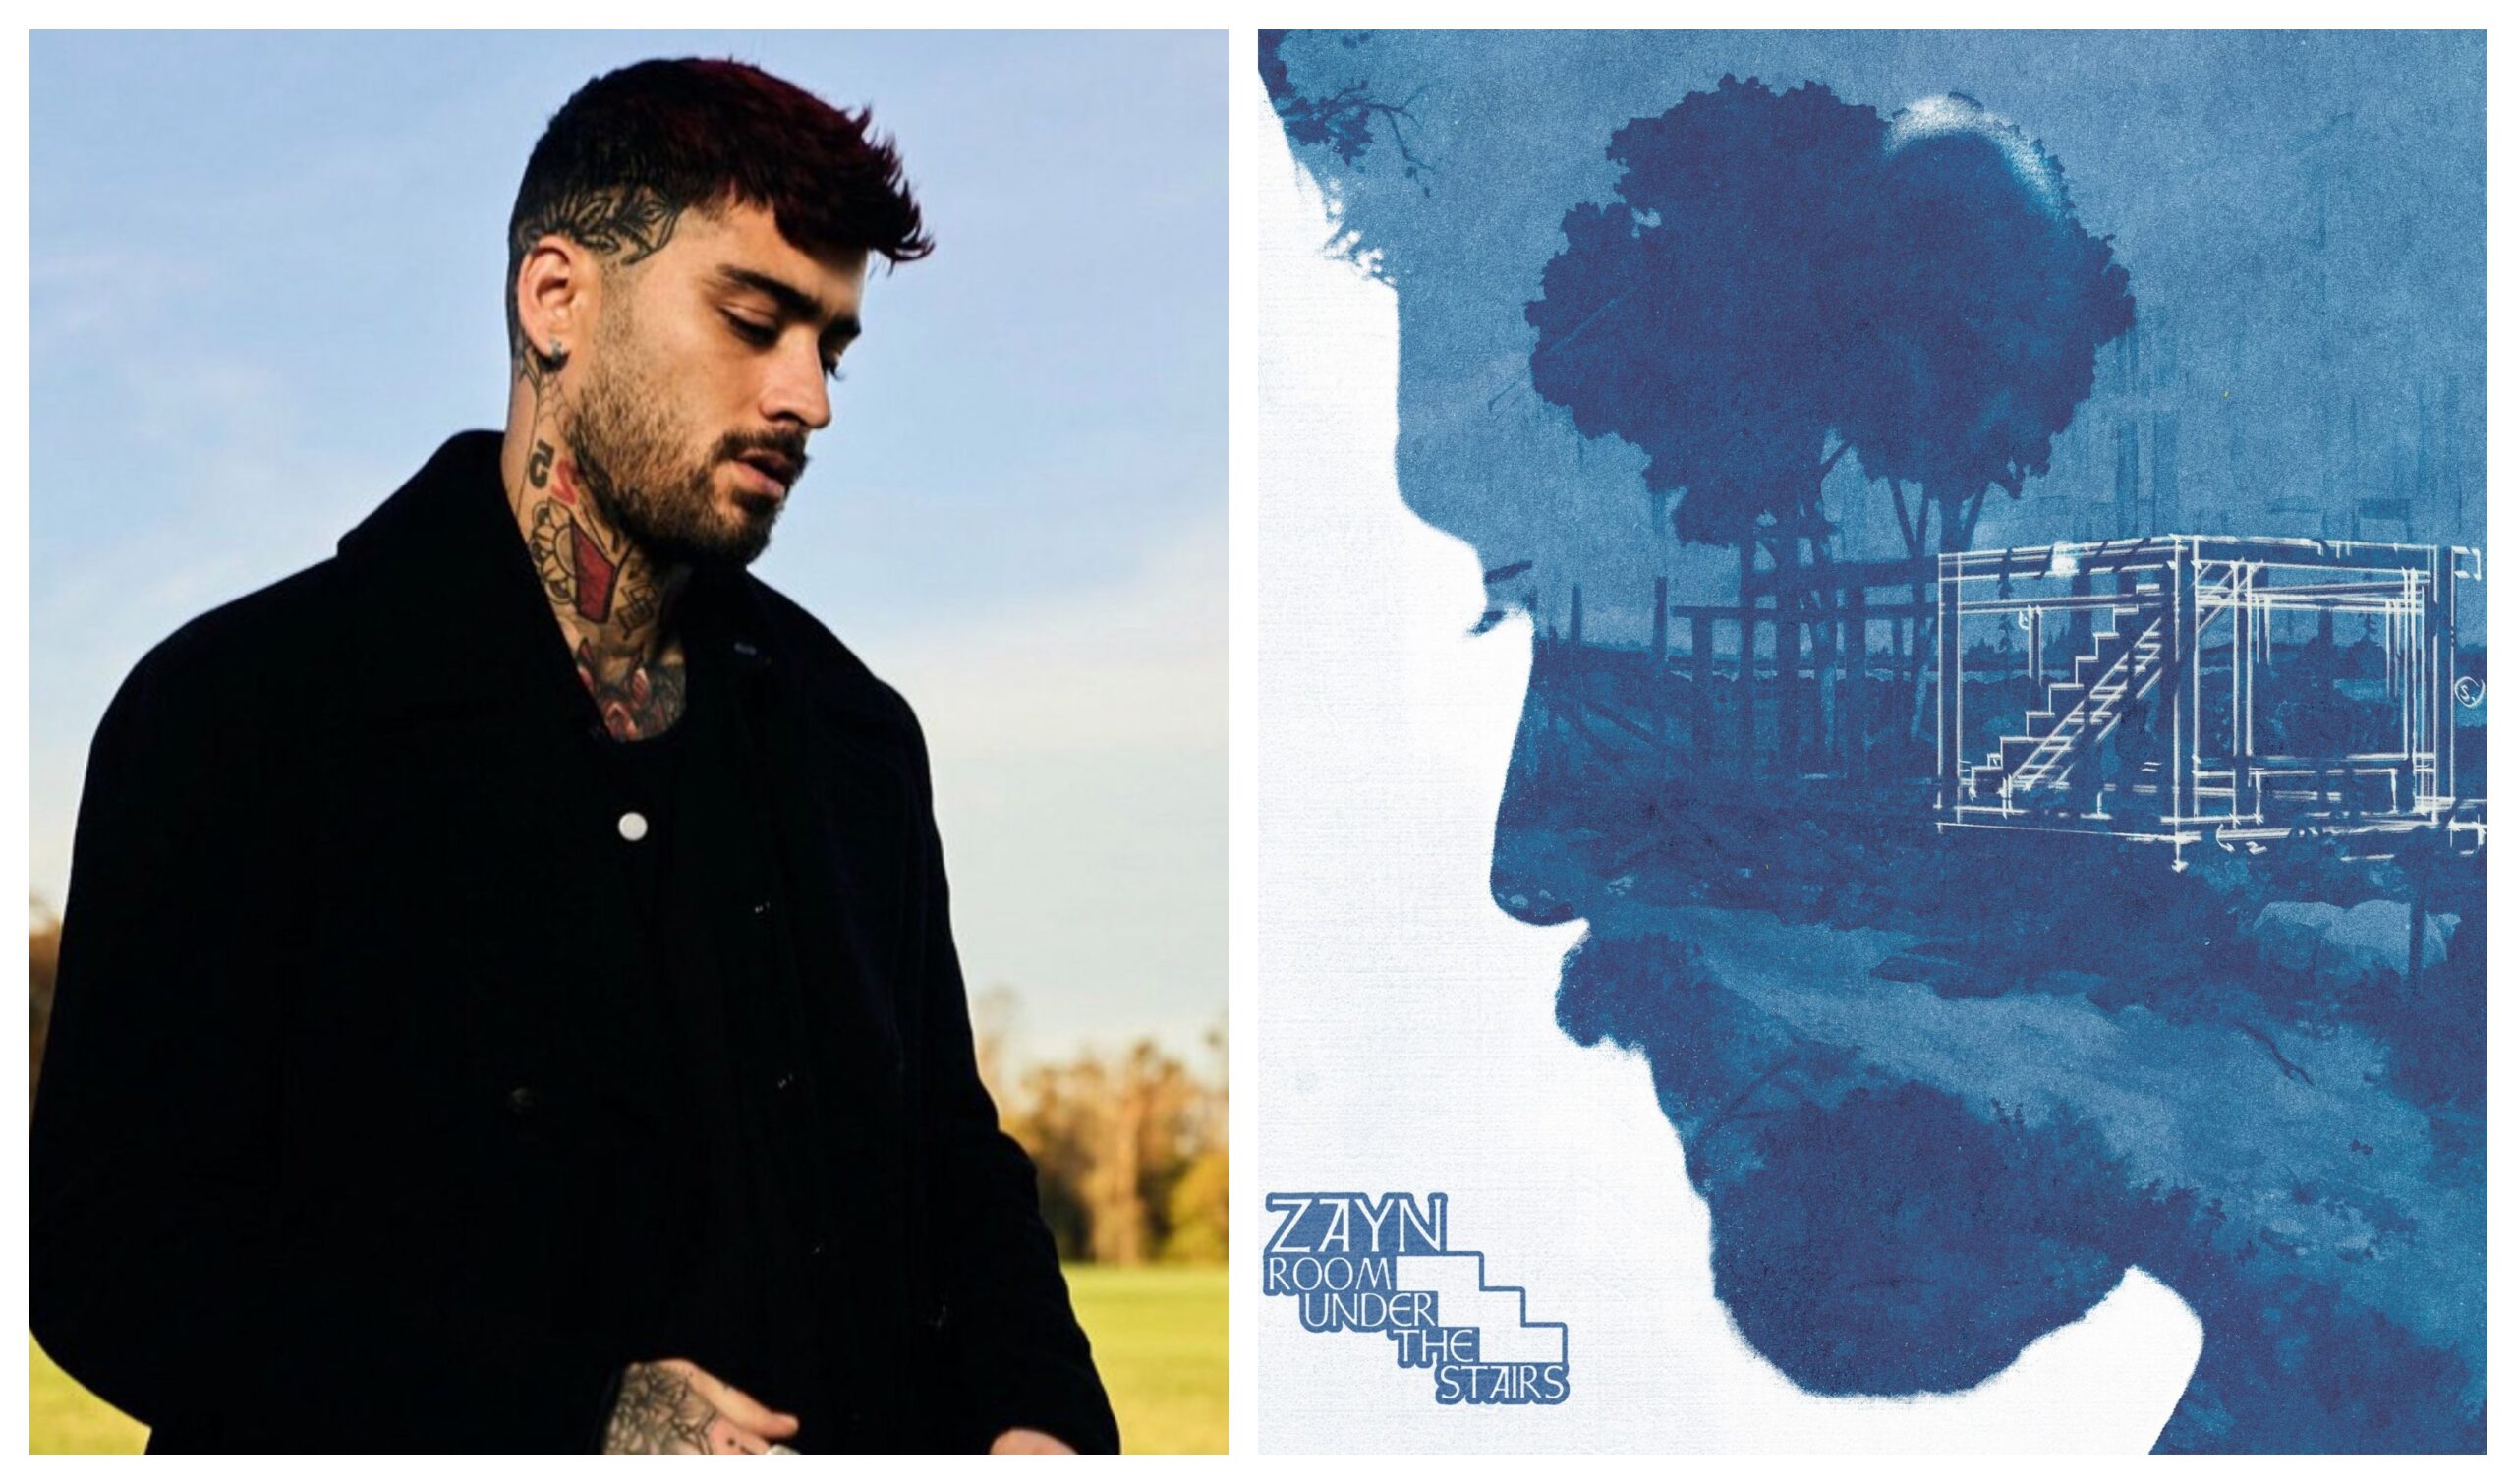 Zayn Announces New Album ‘Room Under the Stairs’ / Reveals Release Date